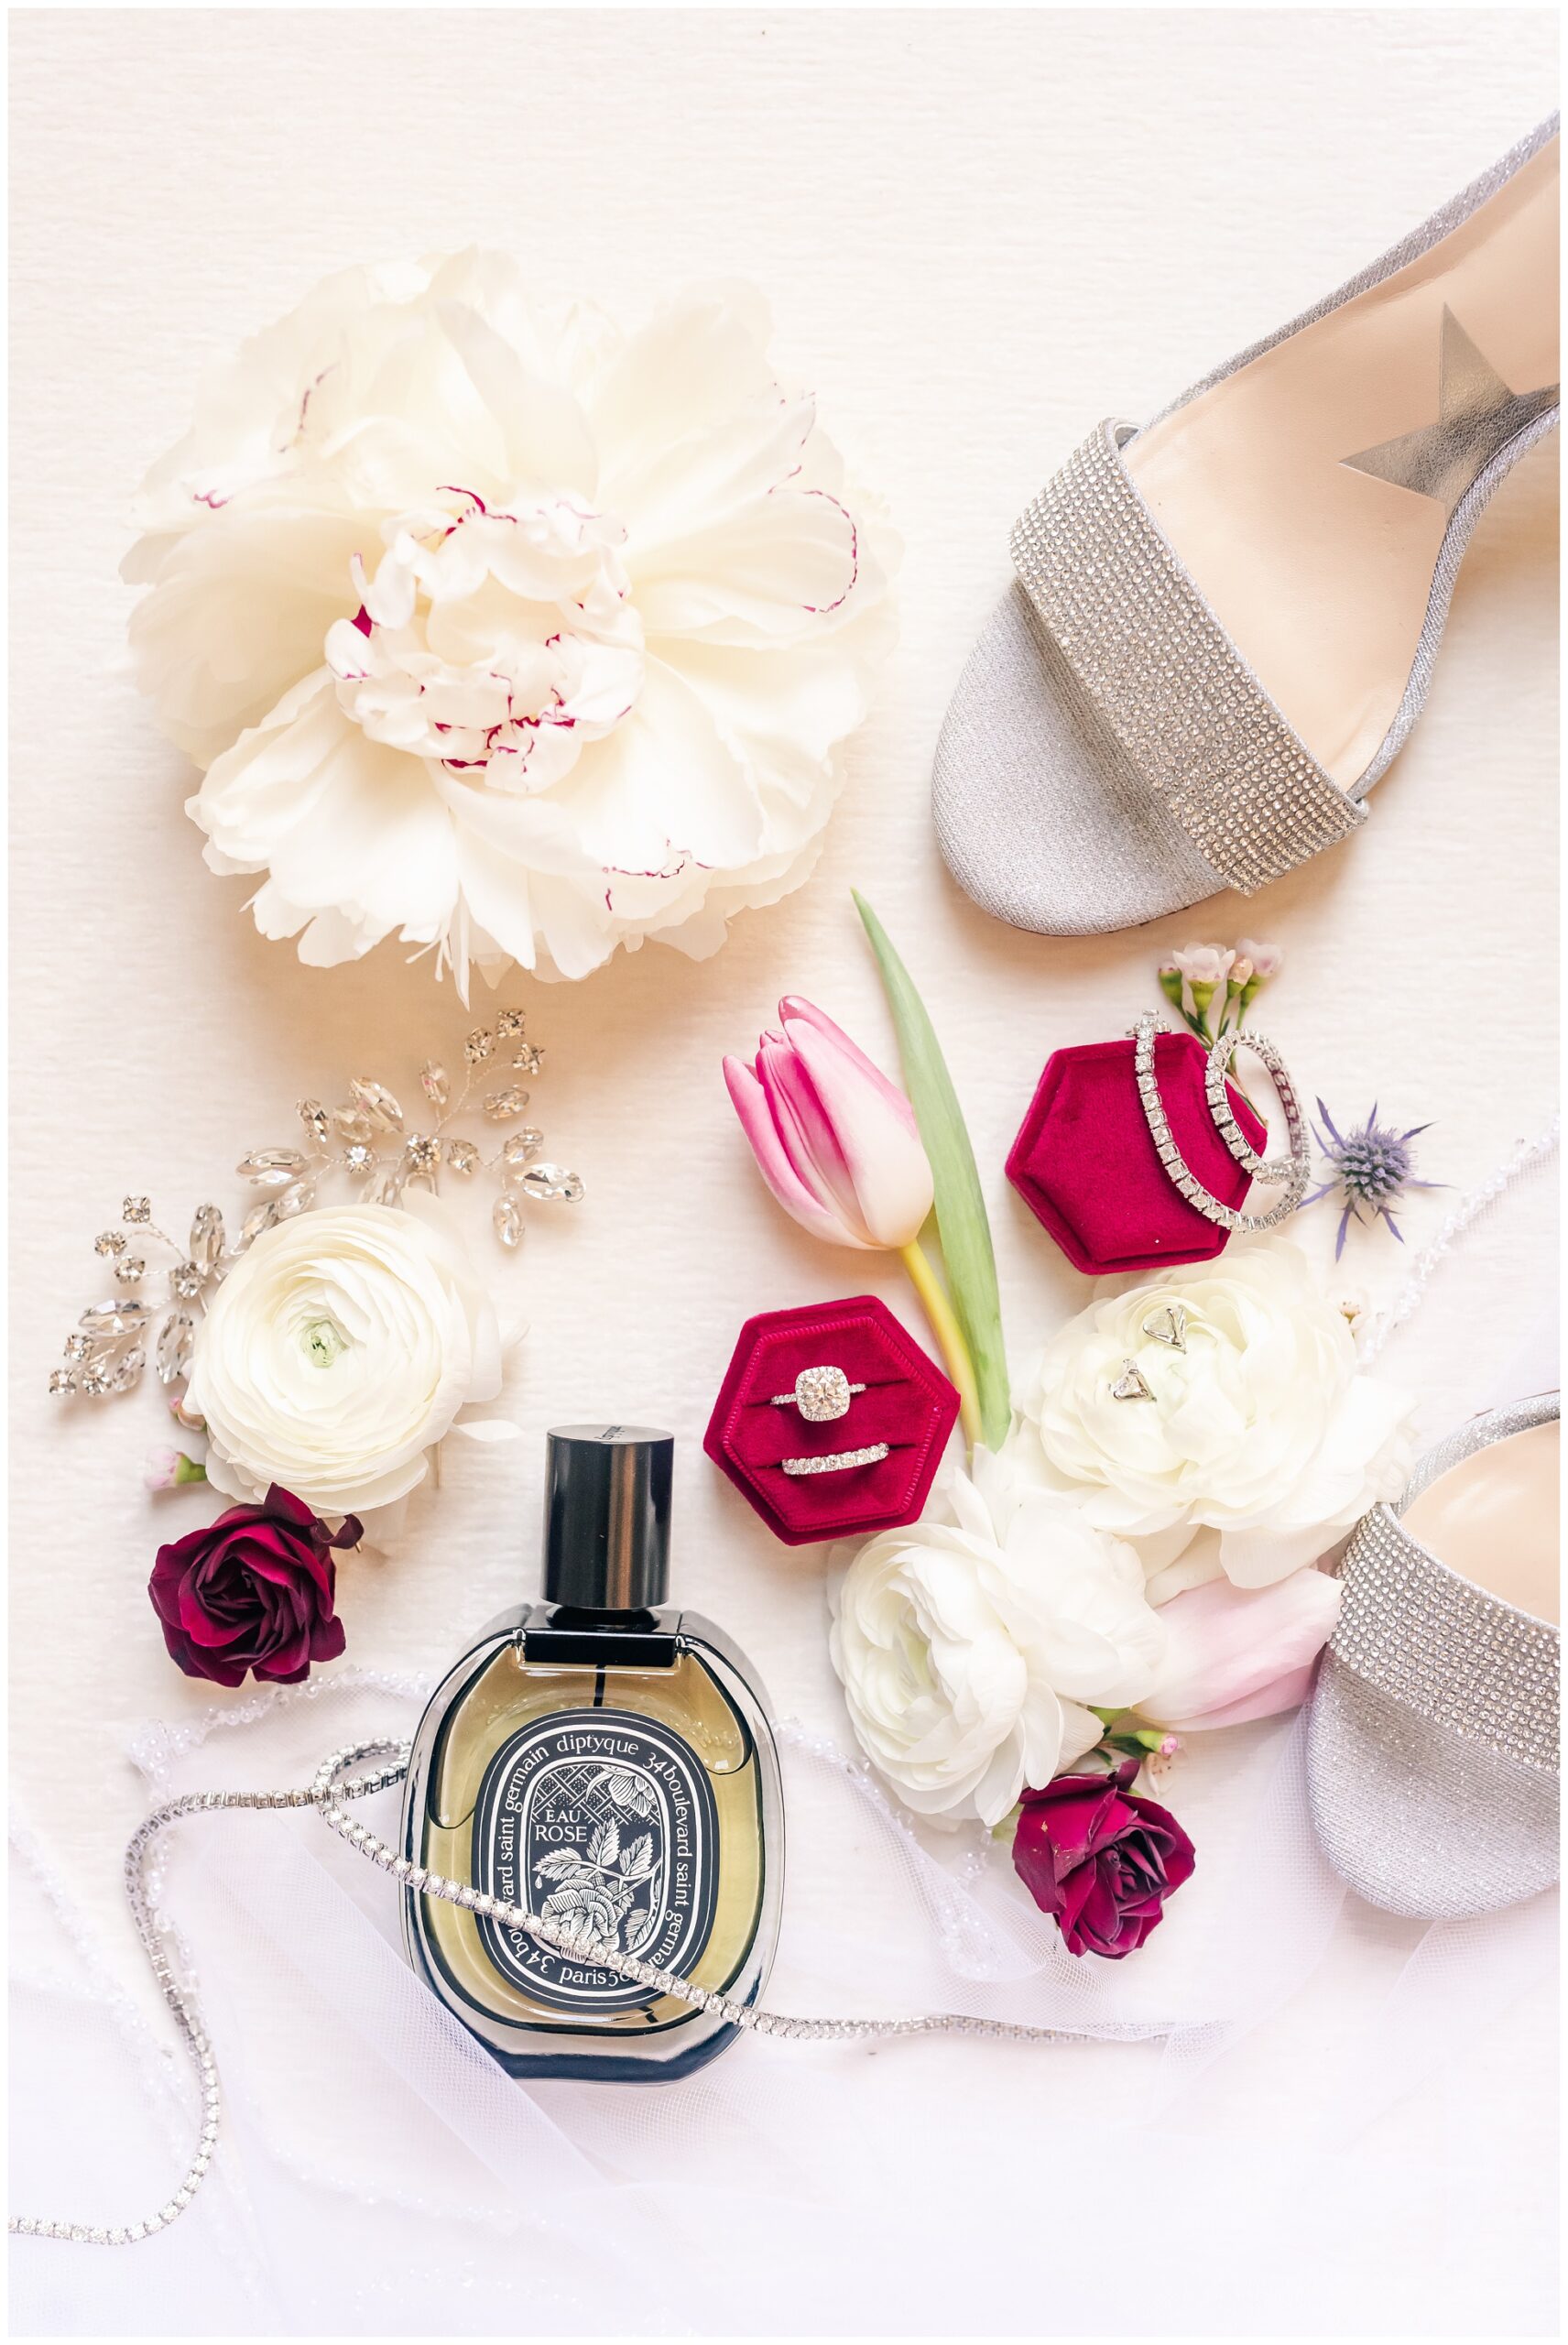 Bridal details flatlay featuring diptych perfume paris, jewelry, shoes, florals.